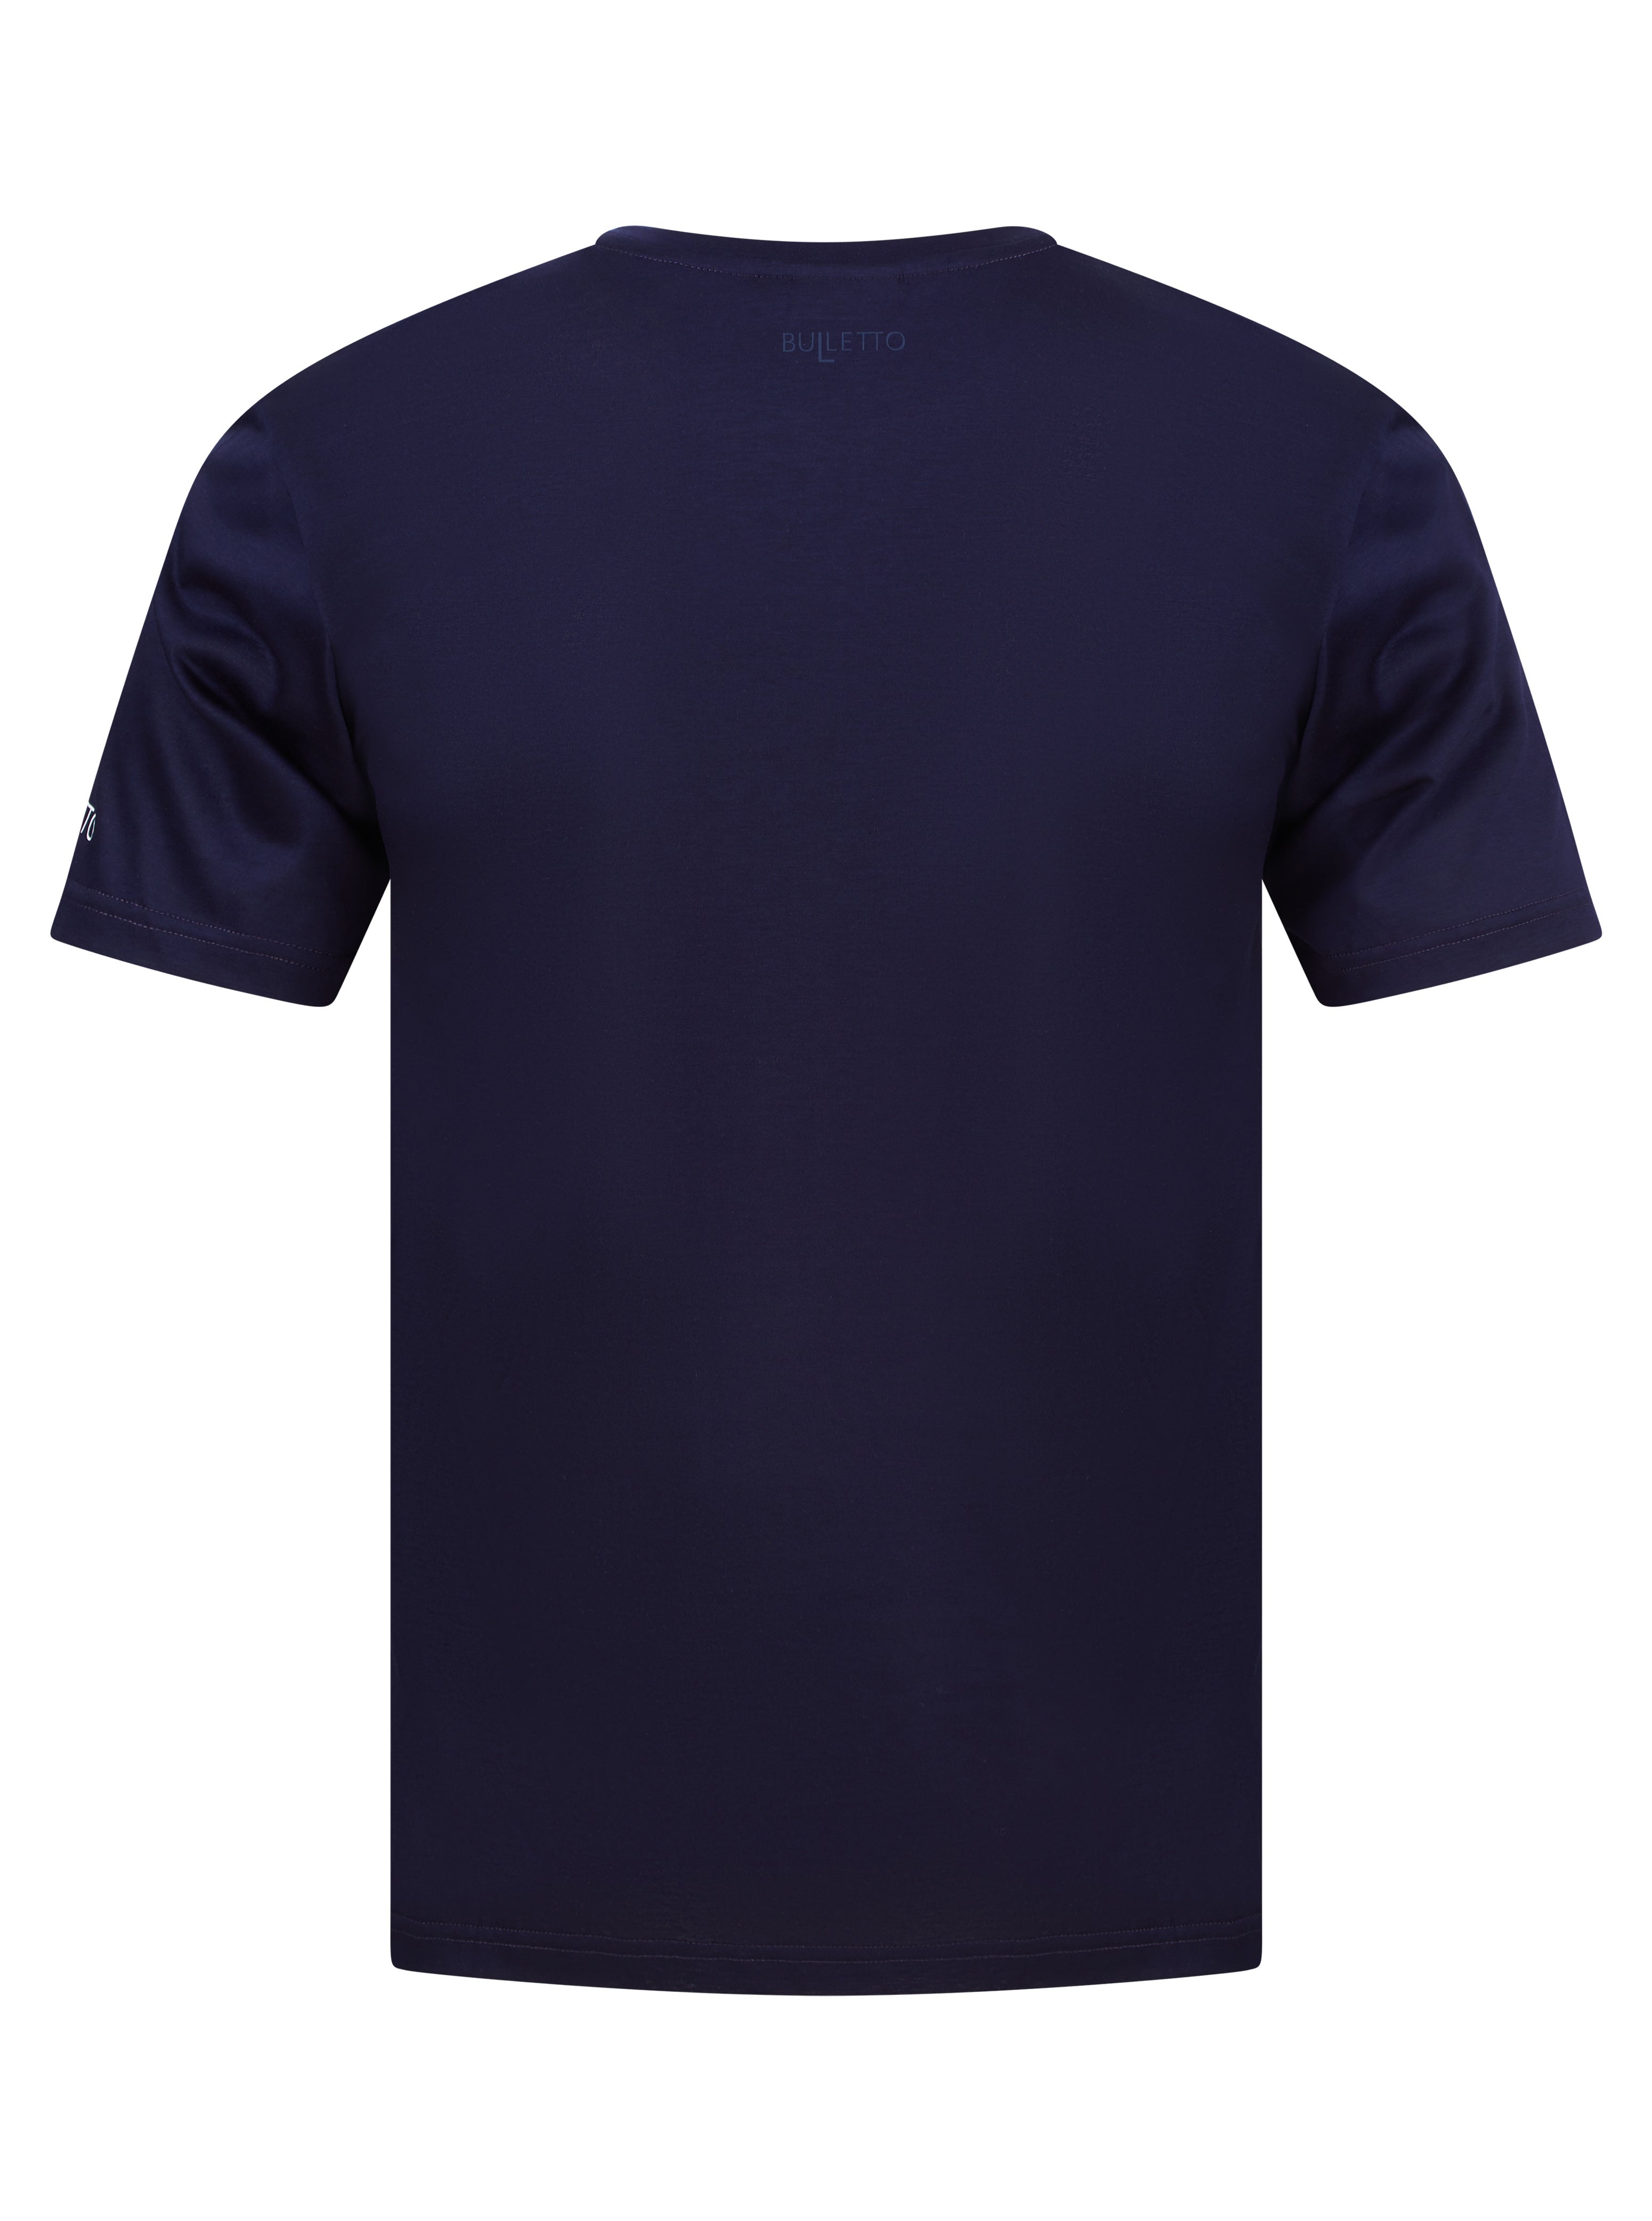 Load image into Gallery viewer, Bulletto Zig Zag T Shirt Navy
